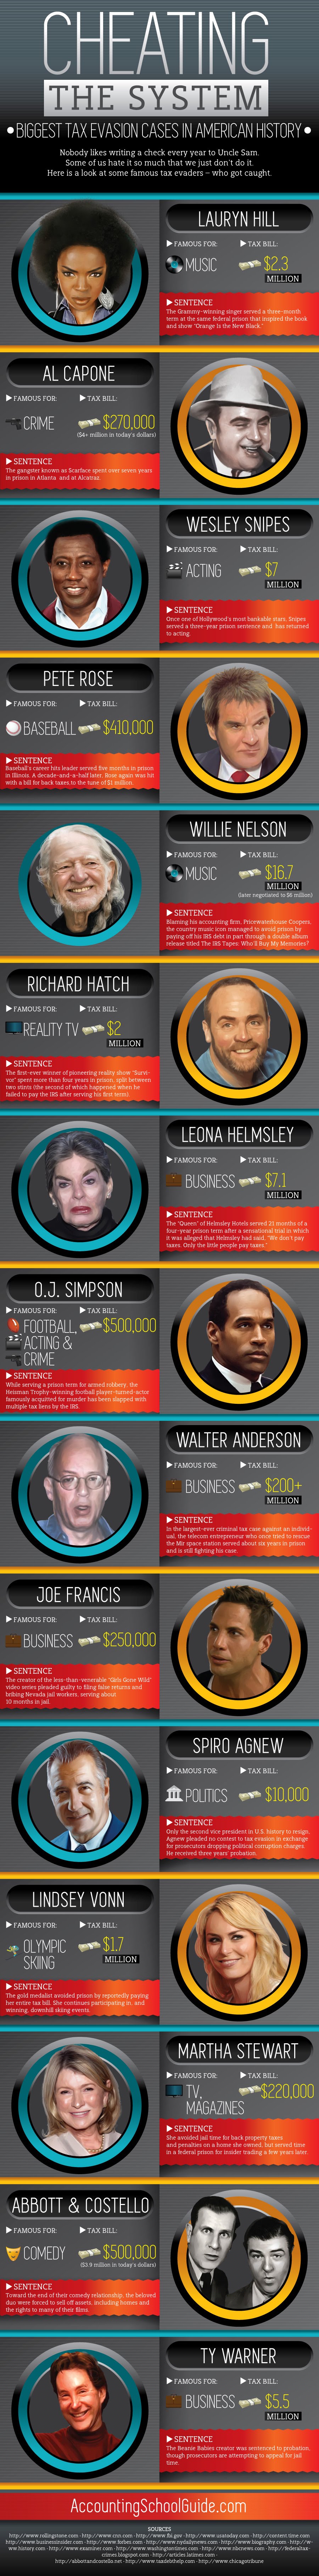 Biggest Tax Evasion Cases in American History #infographic